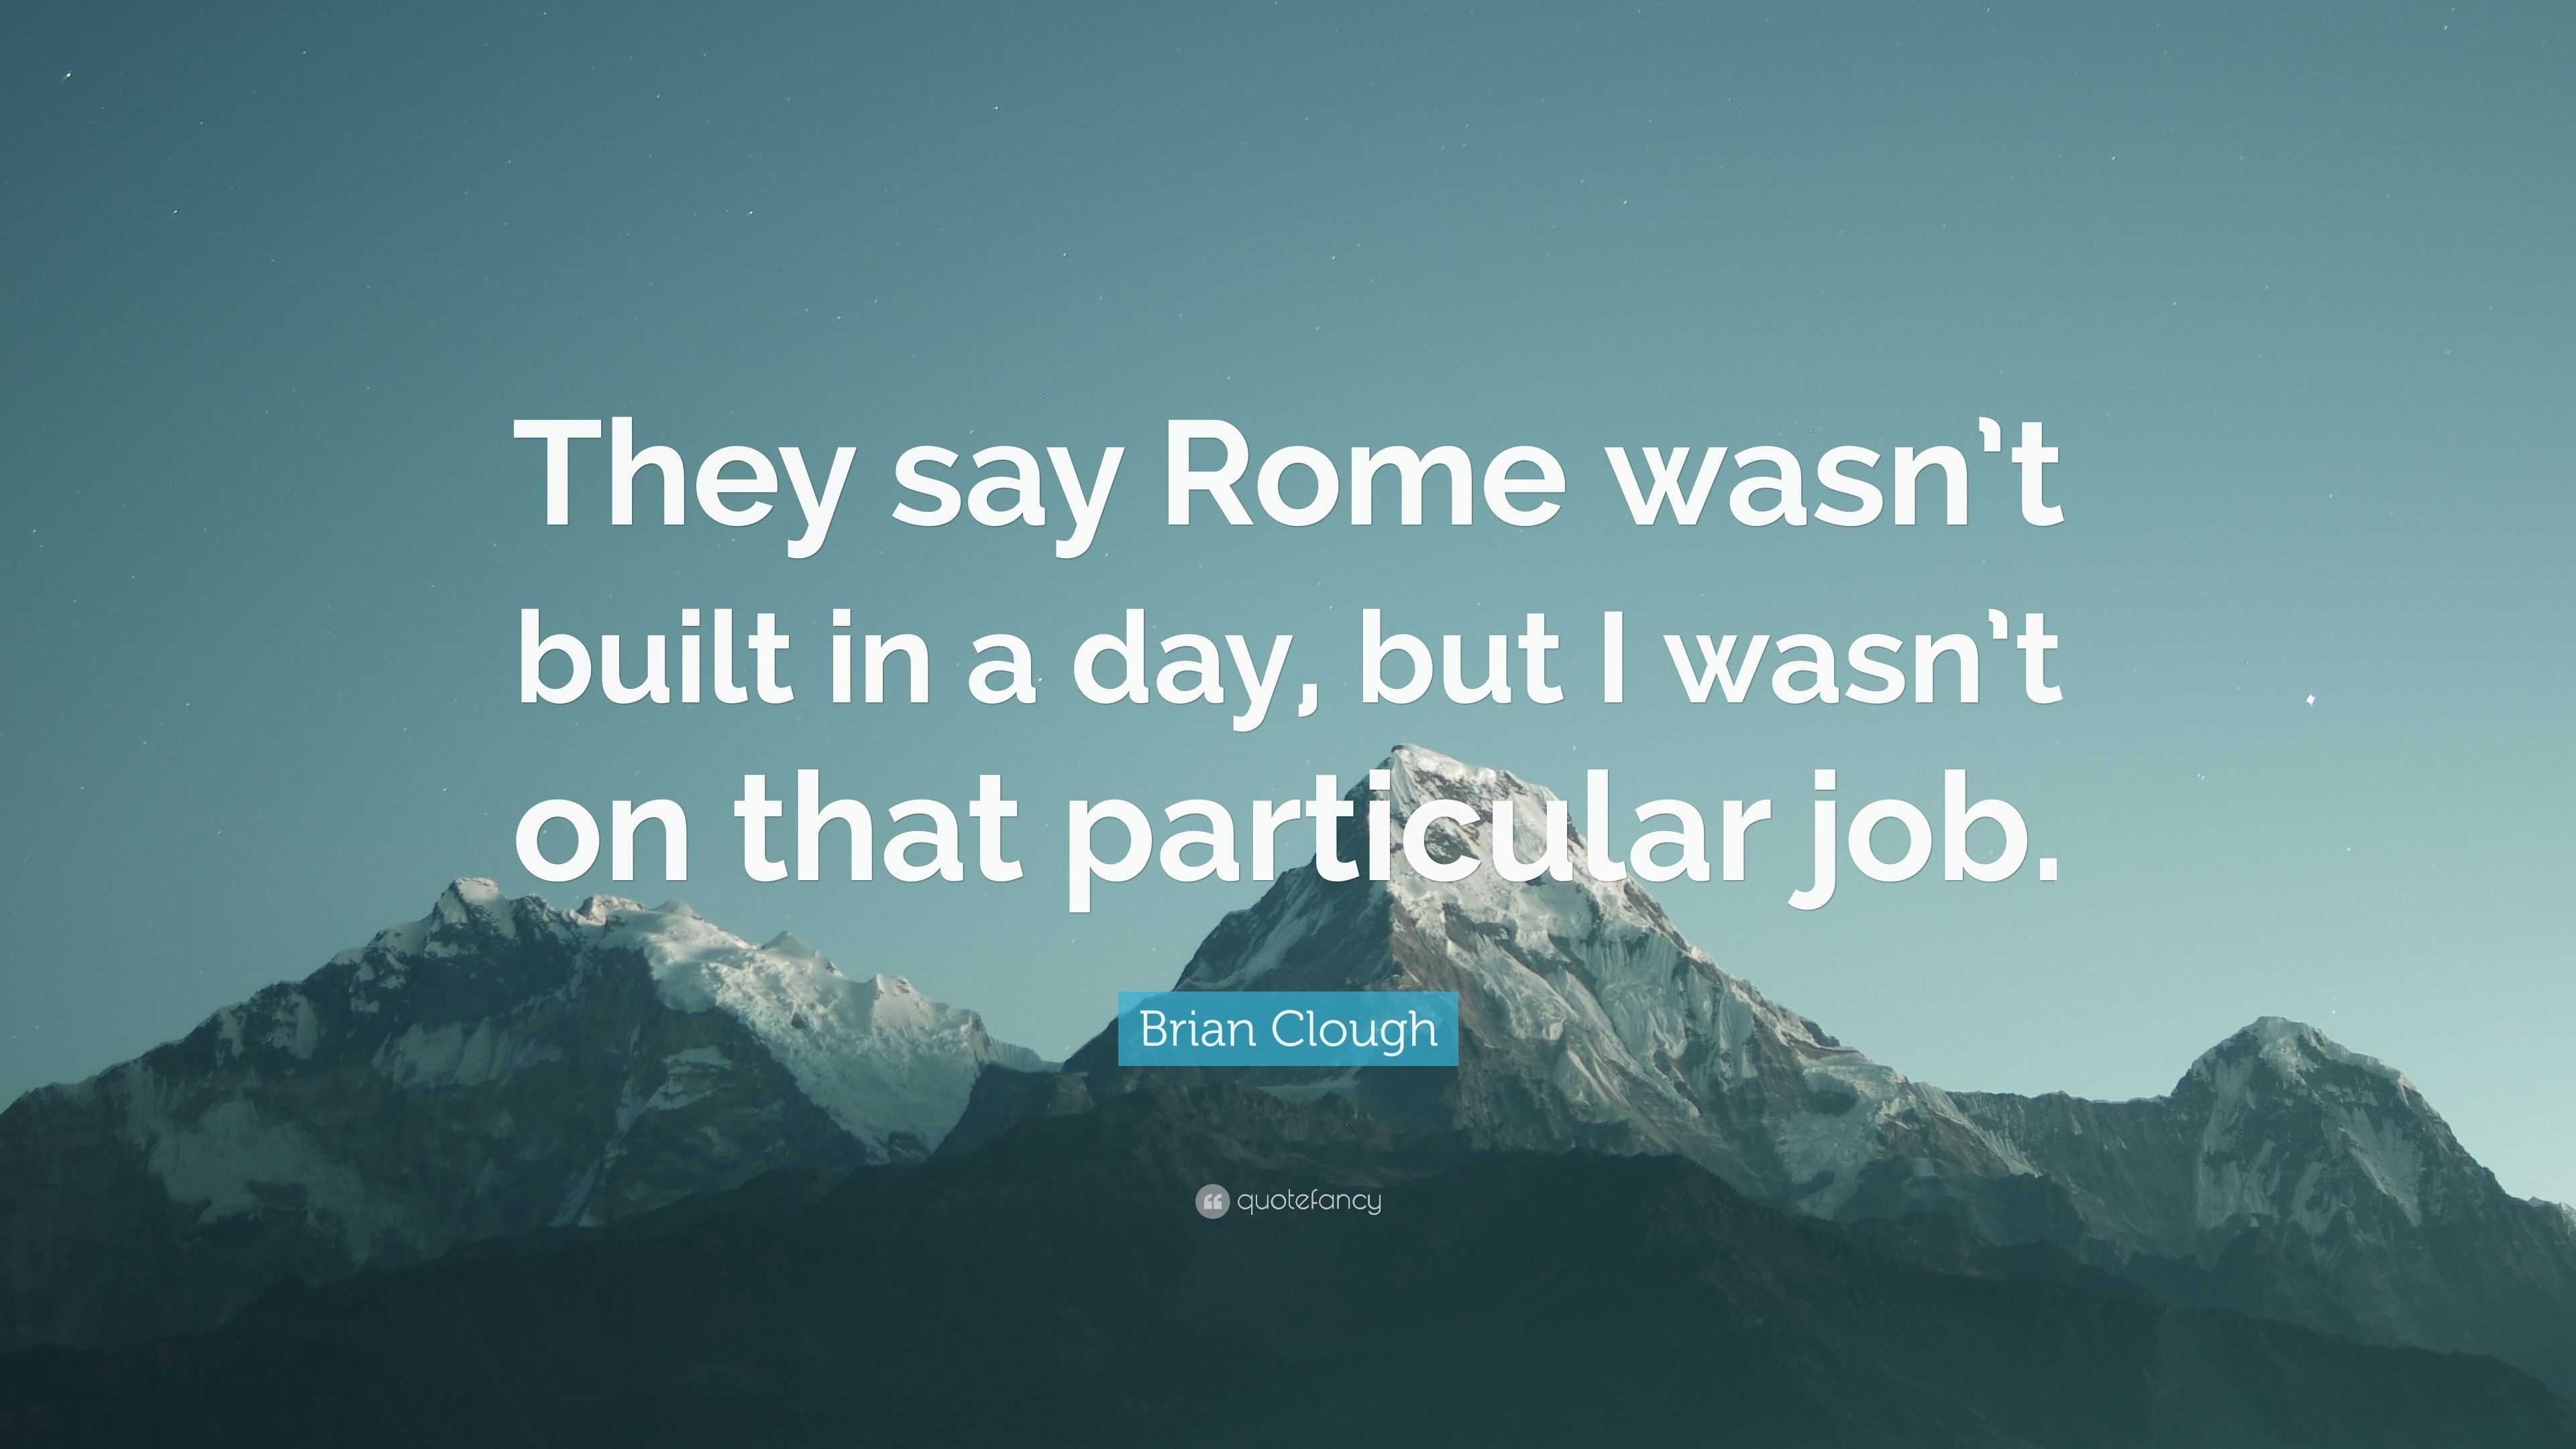 Brian Clough Quote: "They say Rome wasn't built in a day ...